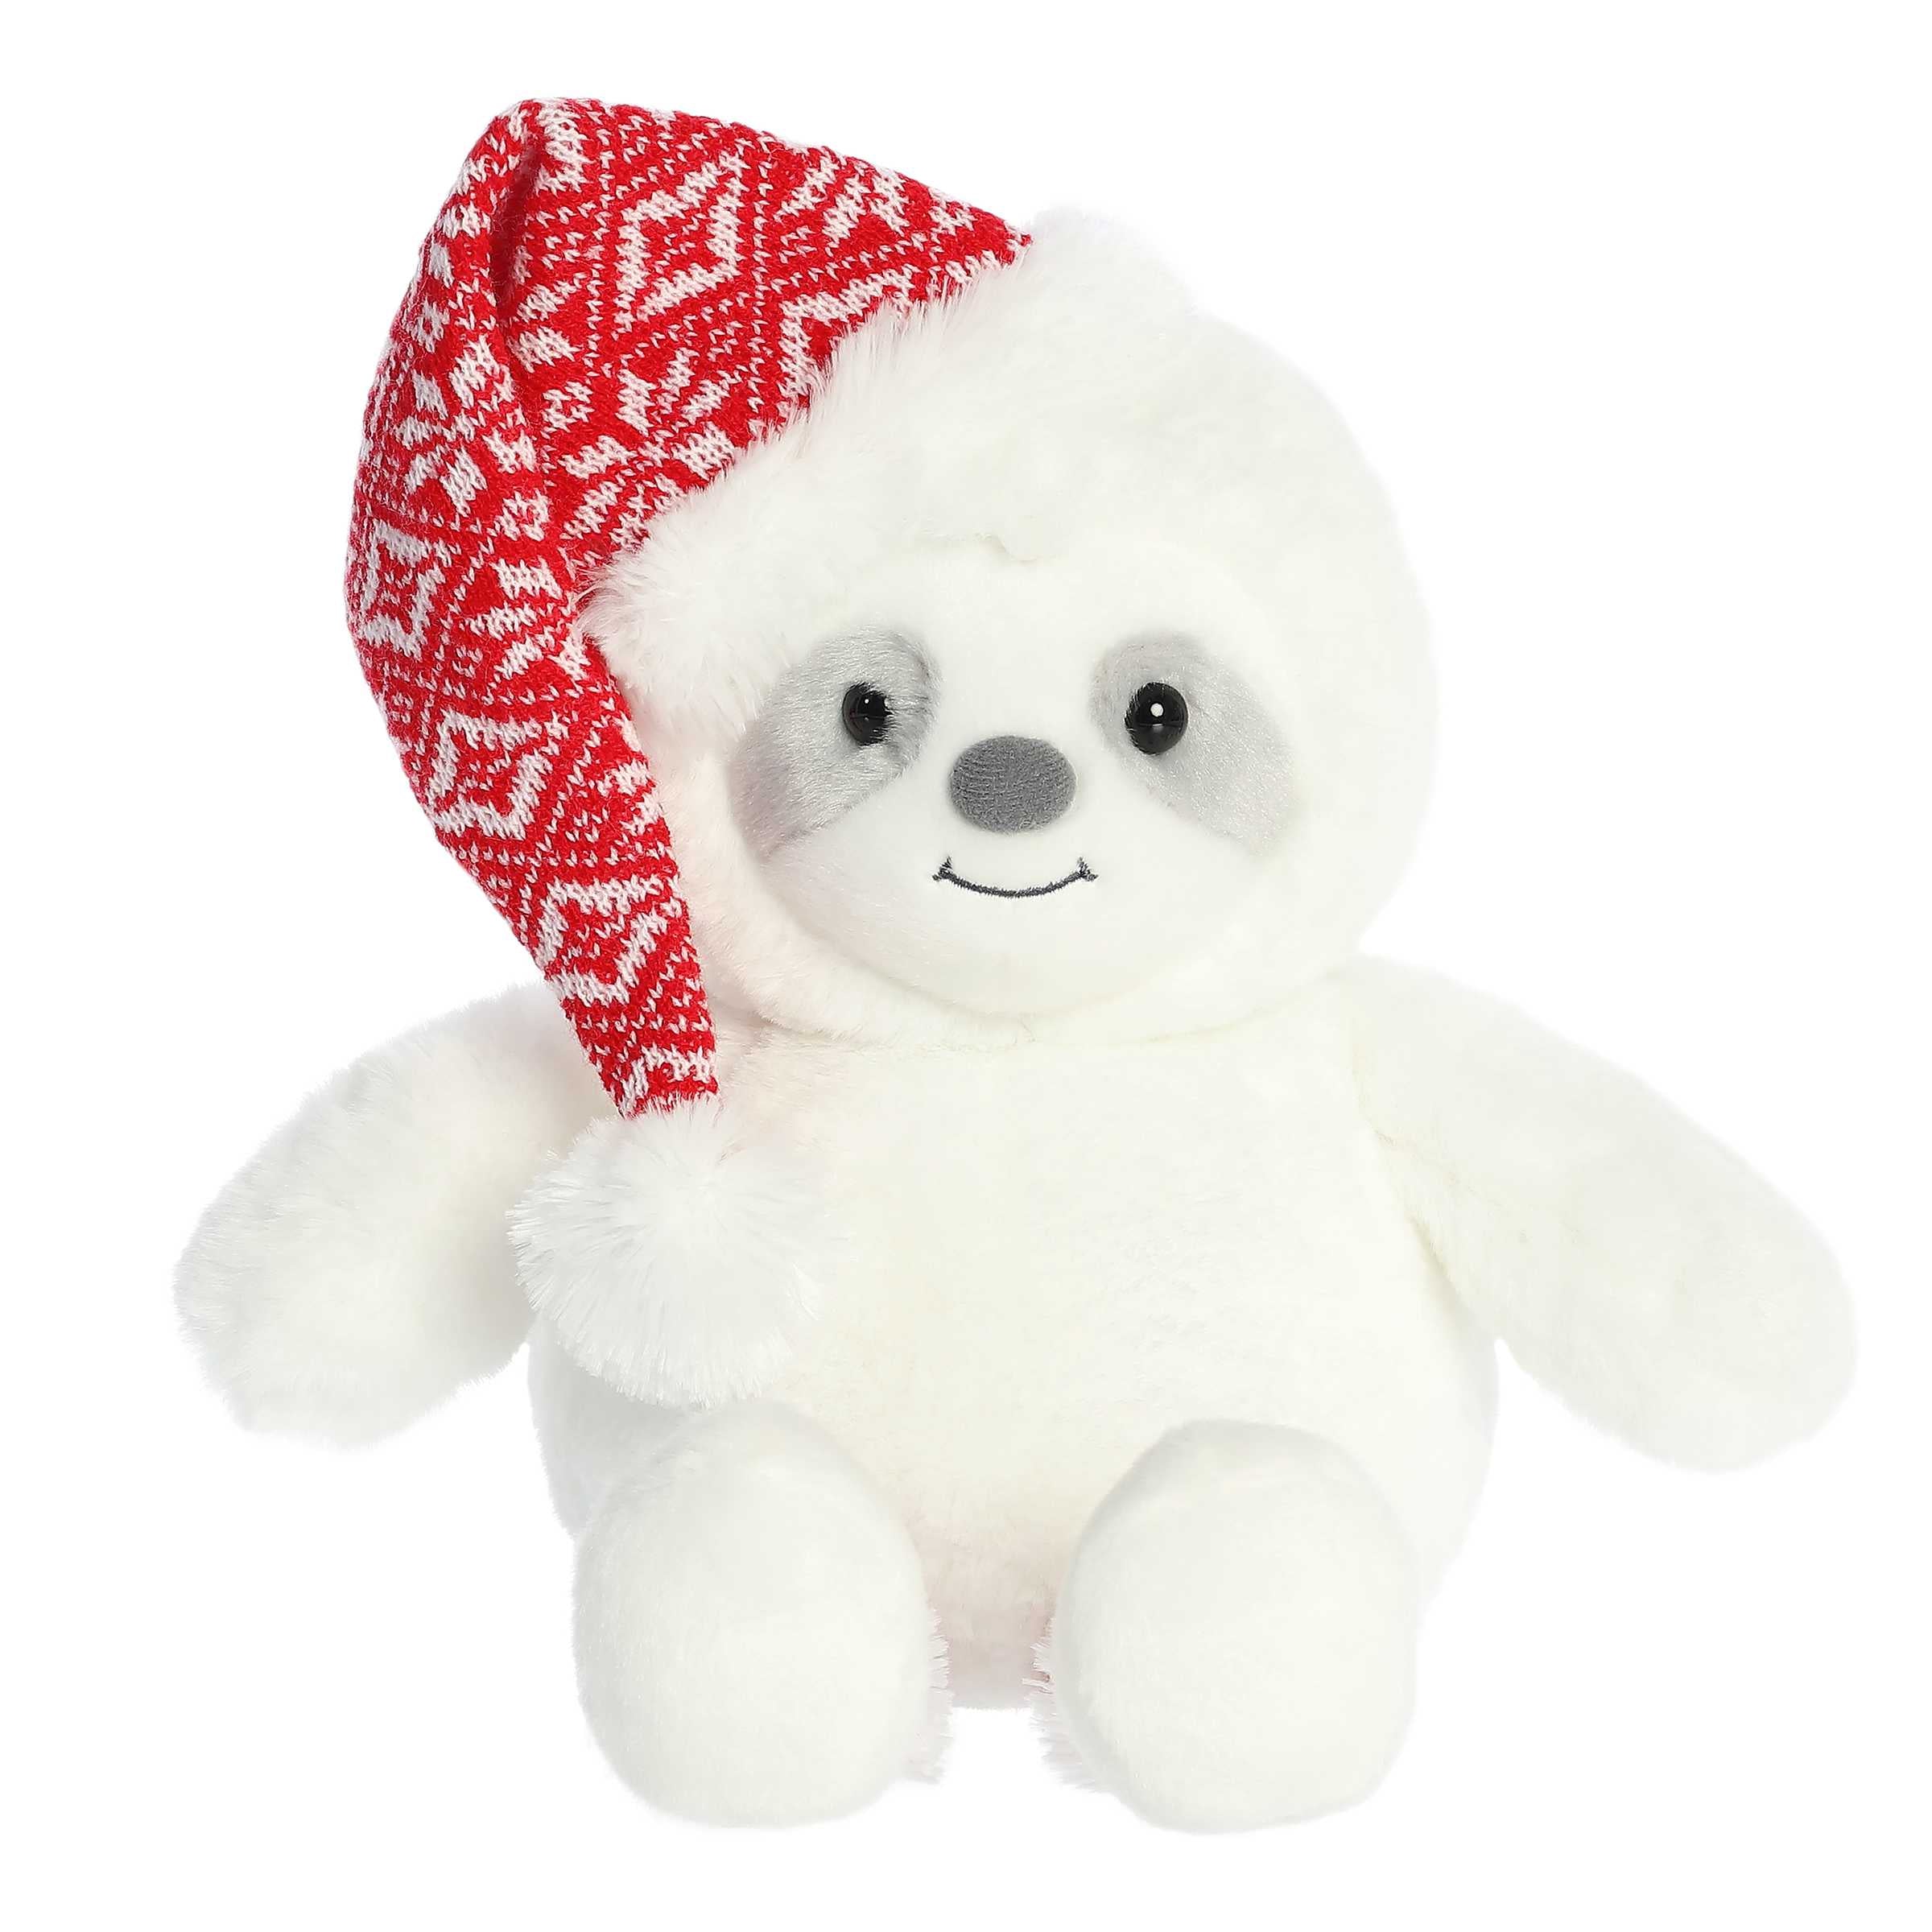 Cuddly white sloth with red and white knit sweater pattern on the legs and a matching non-detachable Santa hat